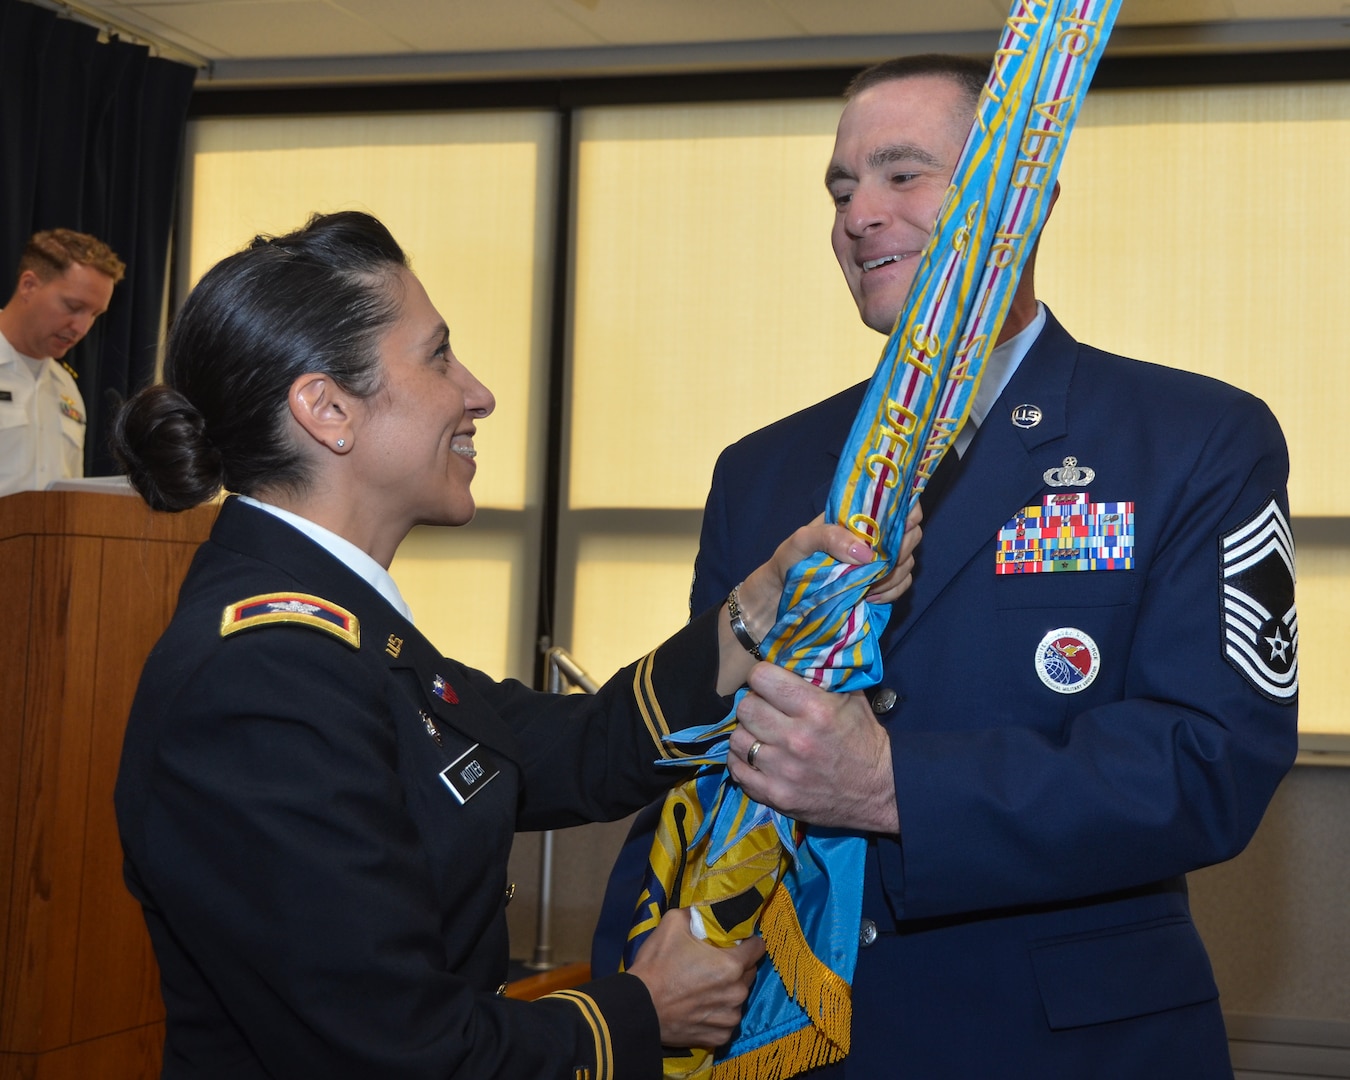 Air Force Chief Master Sgt. Daniel Kenemore, the new senior enlisted advisor (SEA) of USMEPCOM Eastern Sector, receives the unit’s colors and symbolically accepts his new role during a ceremony, Aug. 10, at USMEPCOM headquarters in North Chicago, Illinois. Kenemore received responsibility from Army Col. Janelle Kutter, during the ceremony.